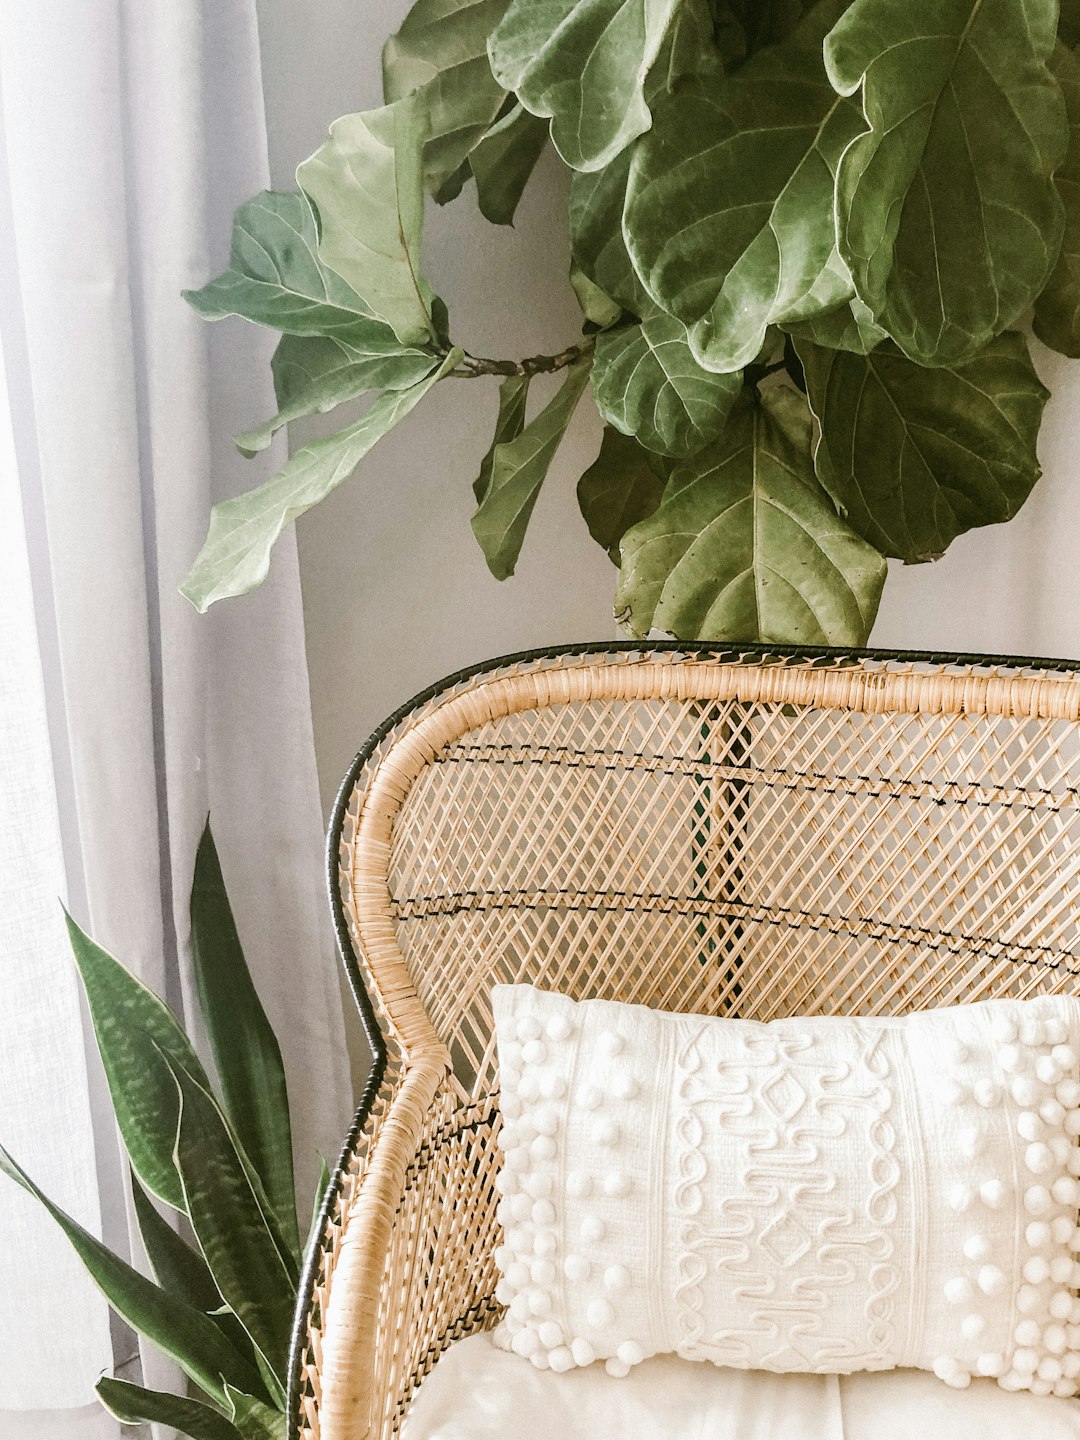 White bohemian wicker chair with a white embroidered cushion, a plant in the background, bohemian style interior design photography, bokeh effect, a fiddle leaf fig tree, aesthetic home decor photography in the style of trending on Instagram.